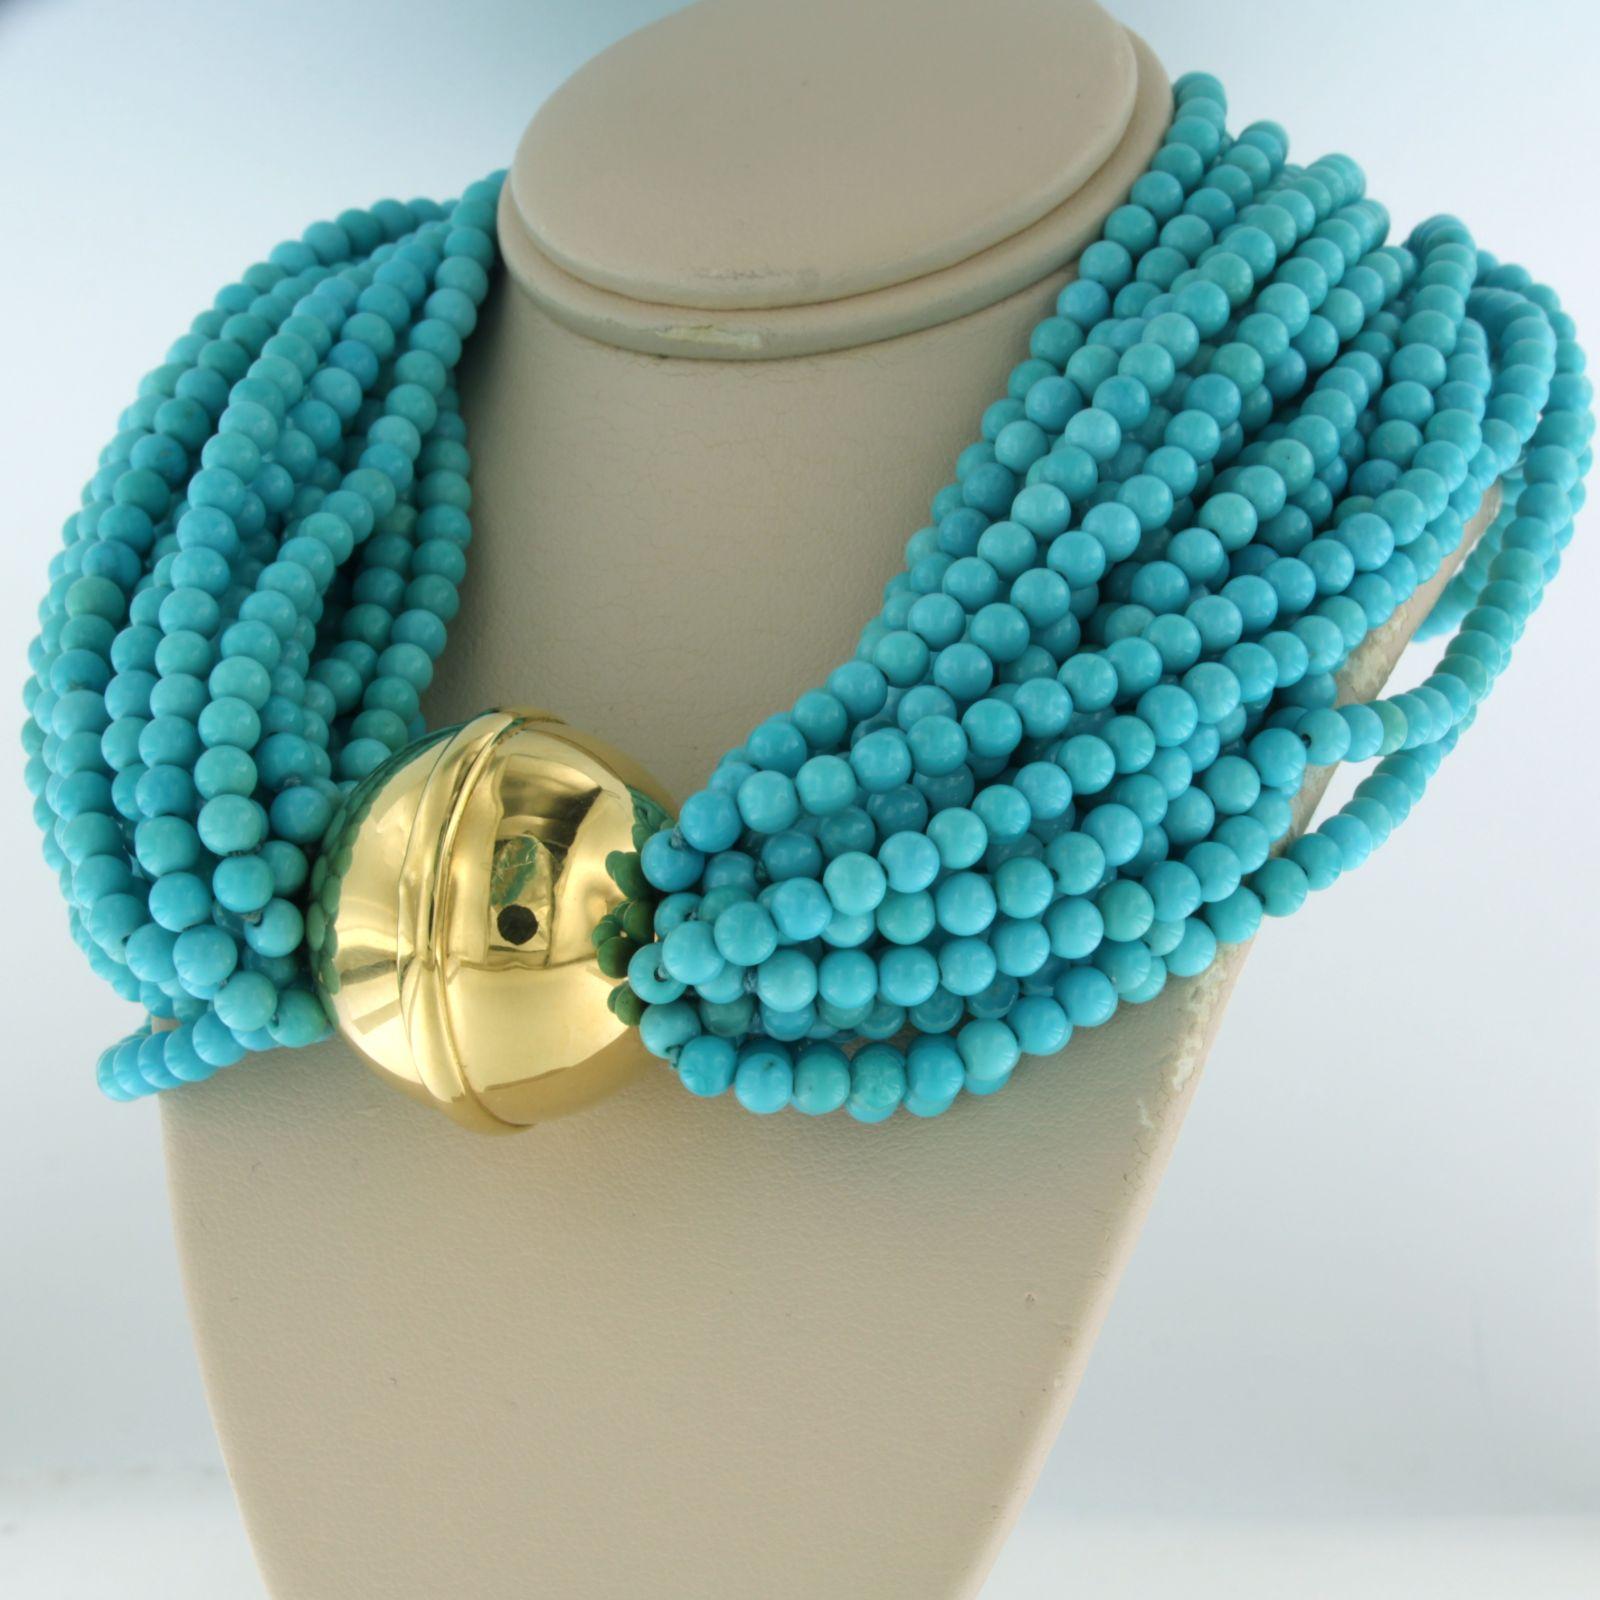 Bead Necklace with turquoise beads on a 18k yellow gold lock For Sale